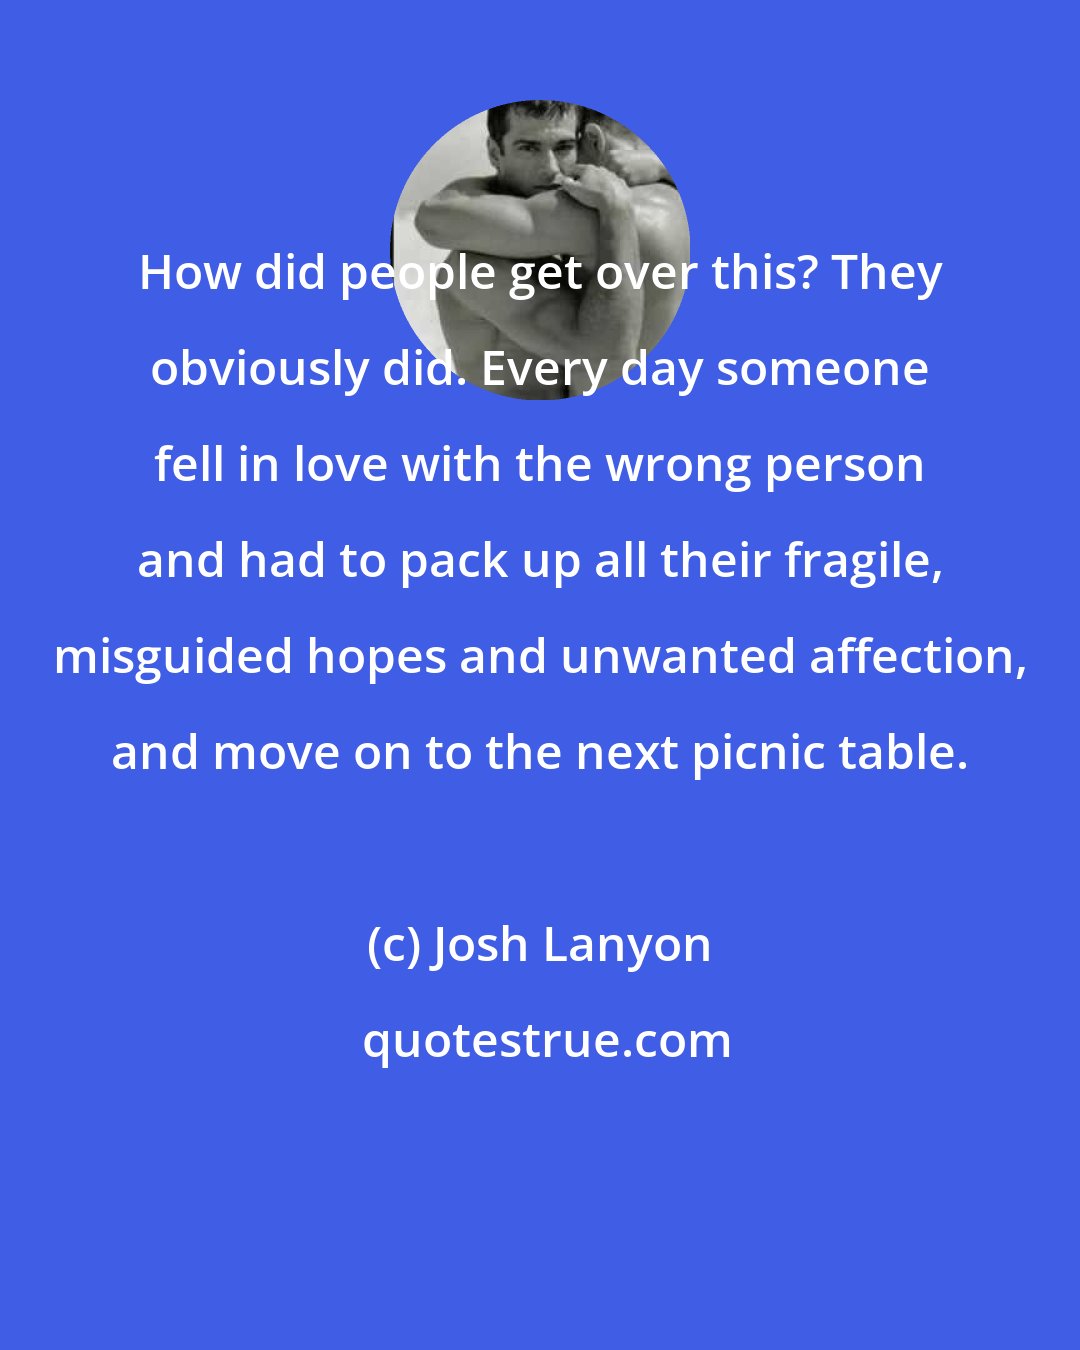 Josh Lanyon: How did people get over this? They obviously did. Every day someone fell in love with the wrong person and had to pack up all their fragile, misguided hopes and unwanted affection, and move on to the next picnic table.